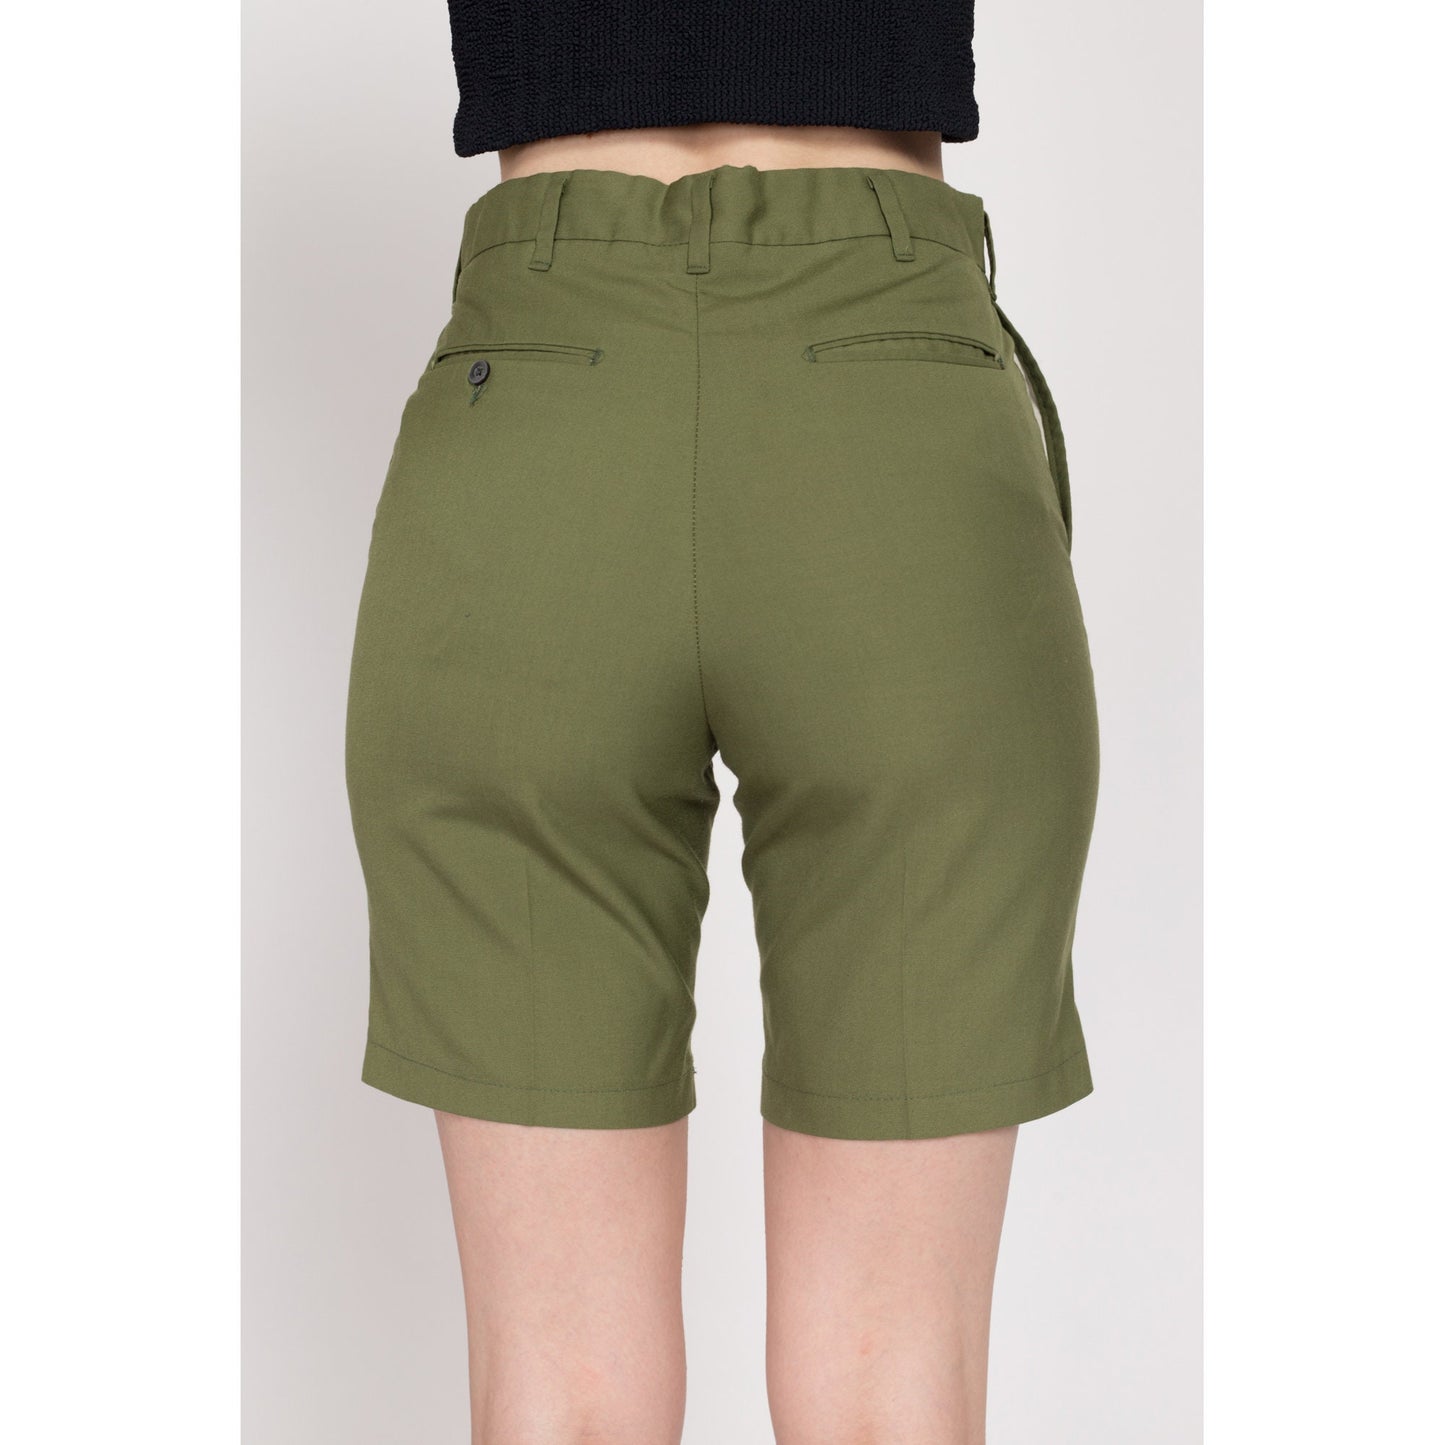 XS 70s Army Green Shorts | Vintage High Waisted Retro Trouser Shorts